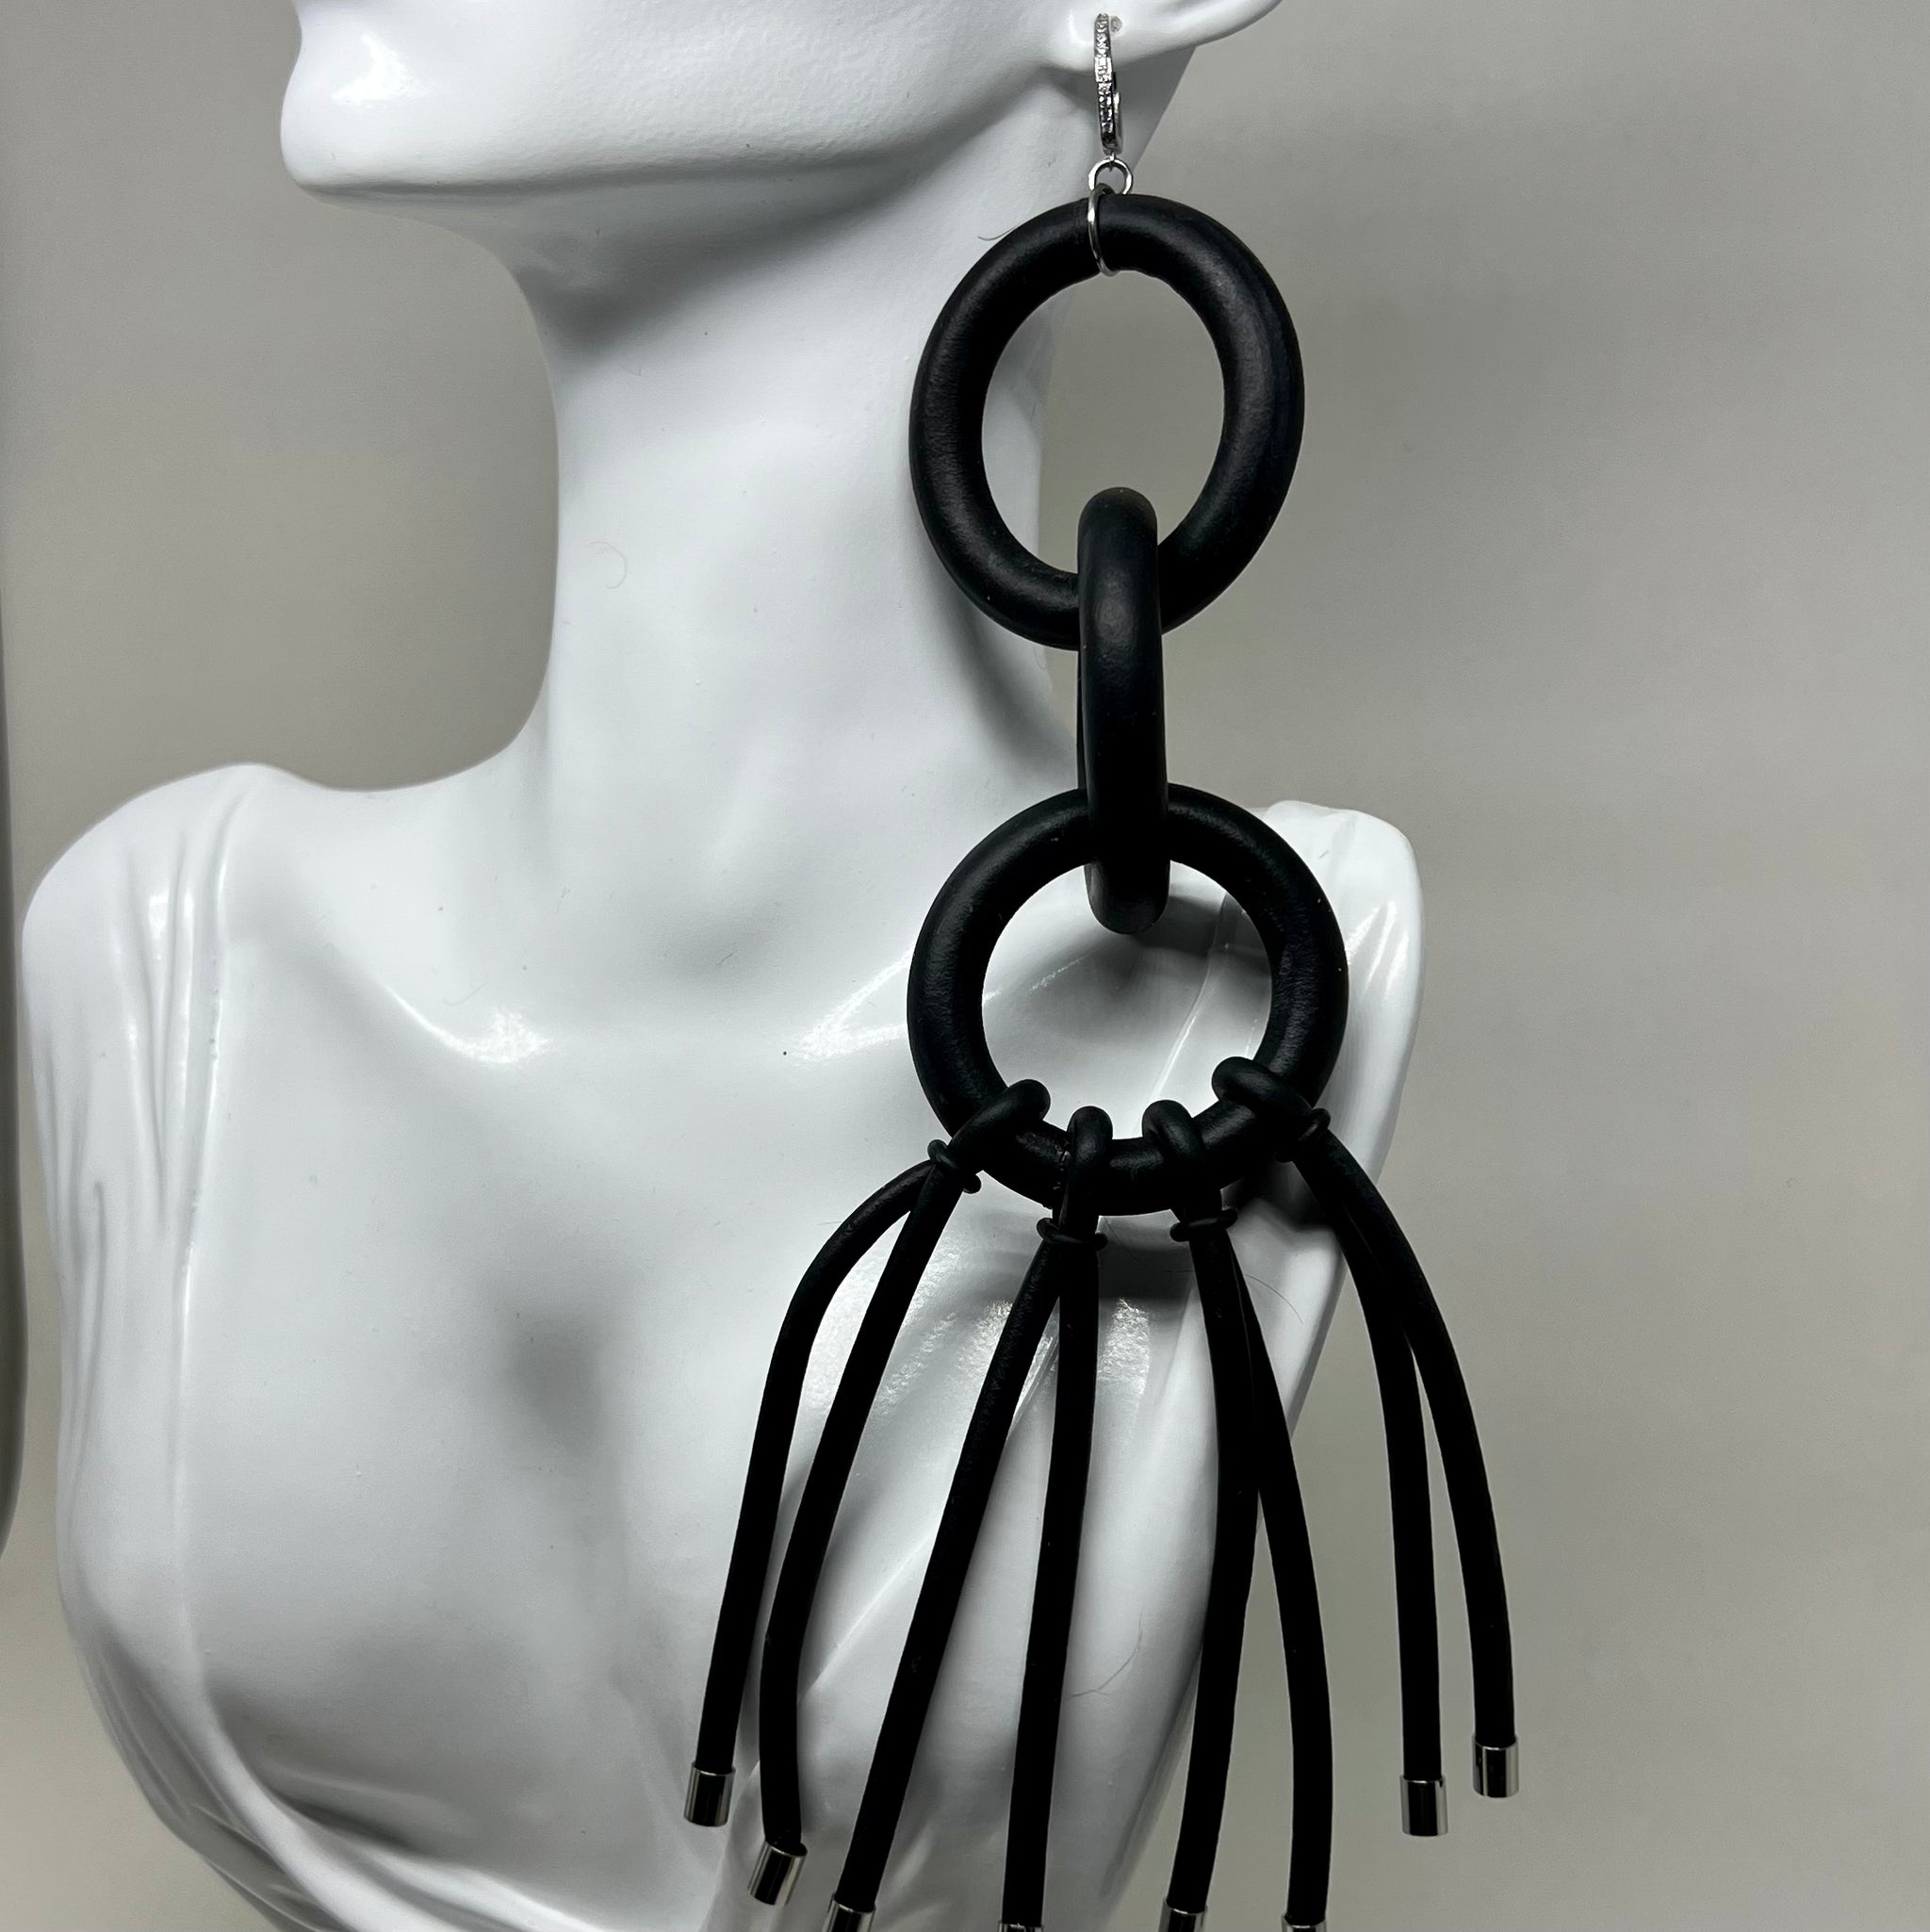 BLACK RUBBER EARRINGS WITH GOLD OR SILVER ENDCAP ACCENTS. by nyet jewelry